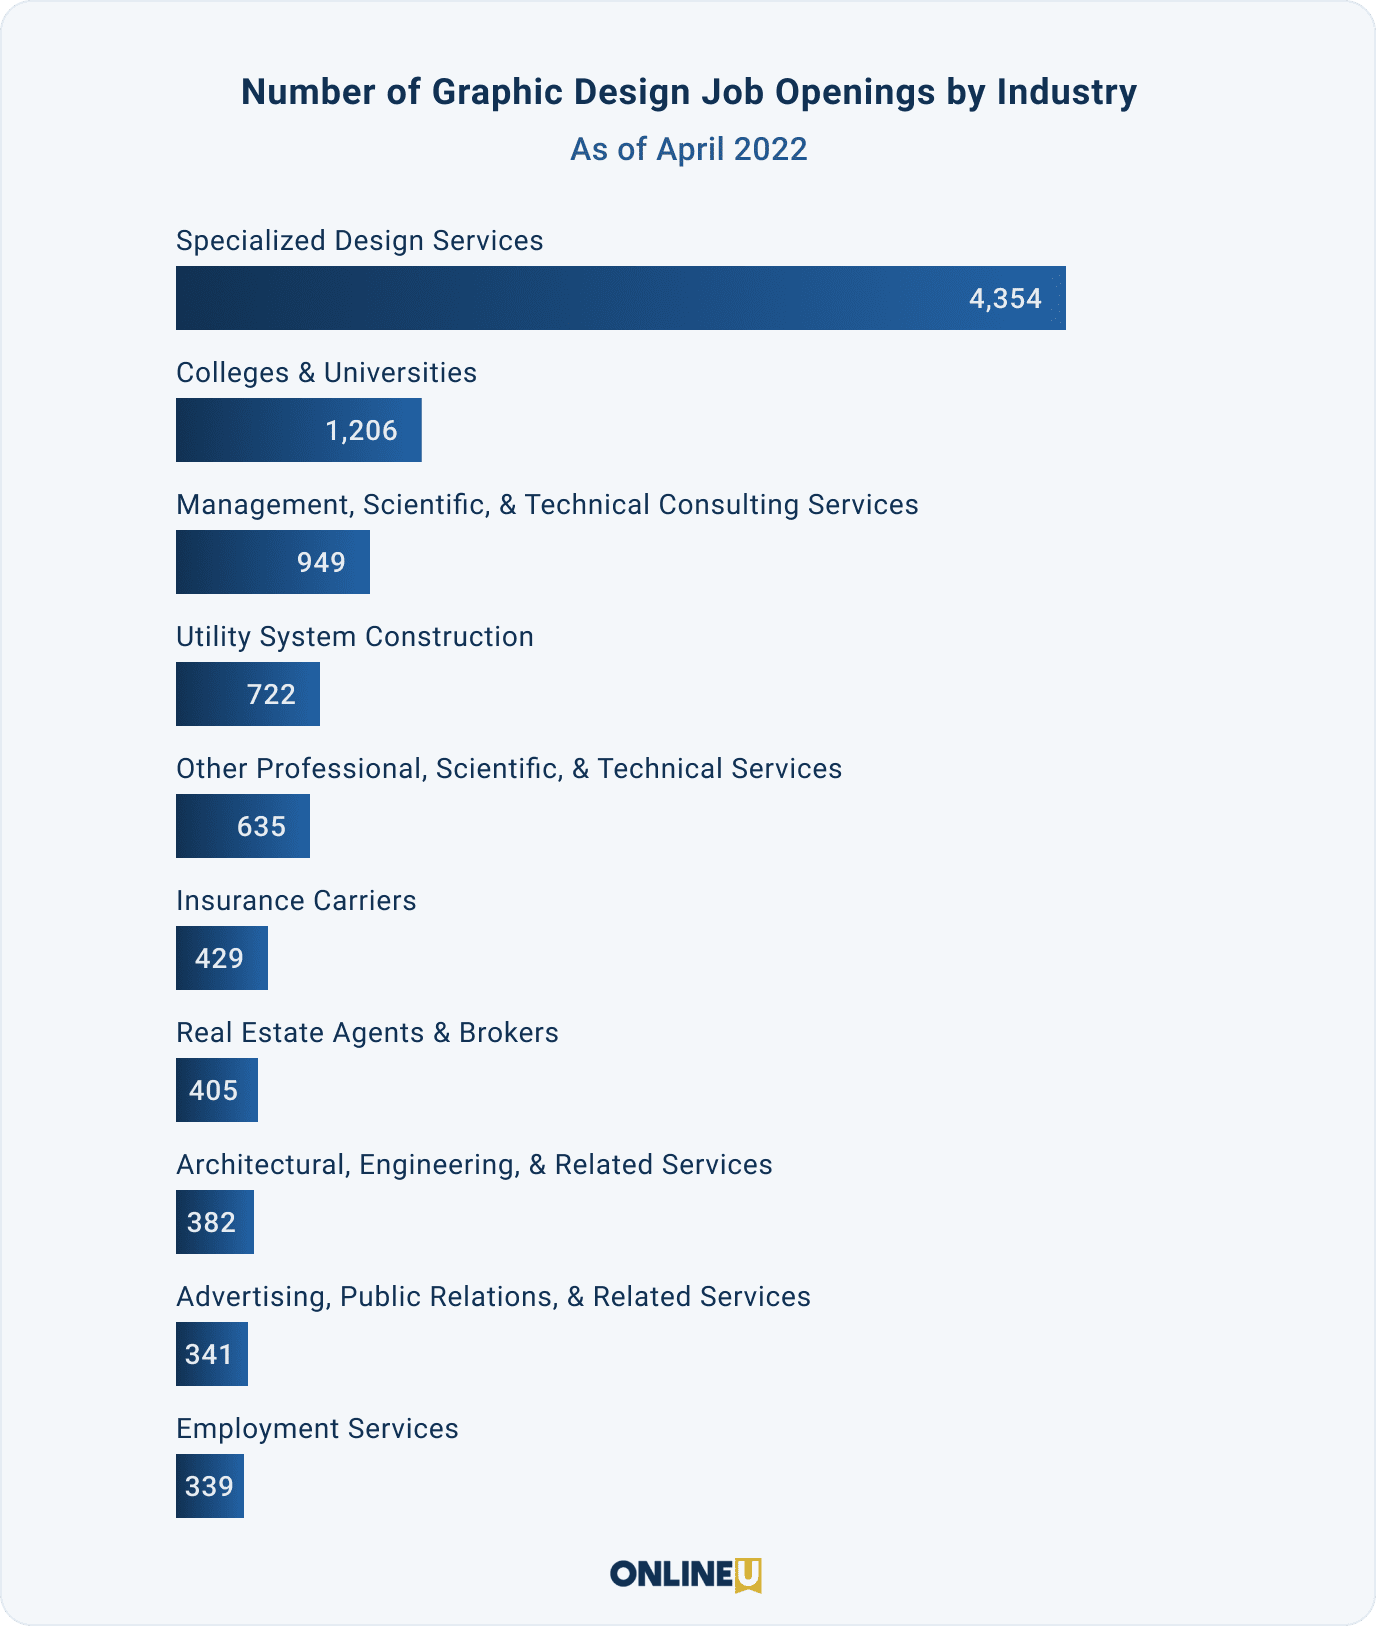 Number of Graphic Design Job Openings by Industry As of April 2022